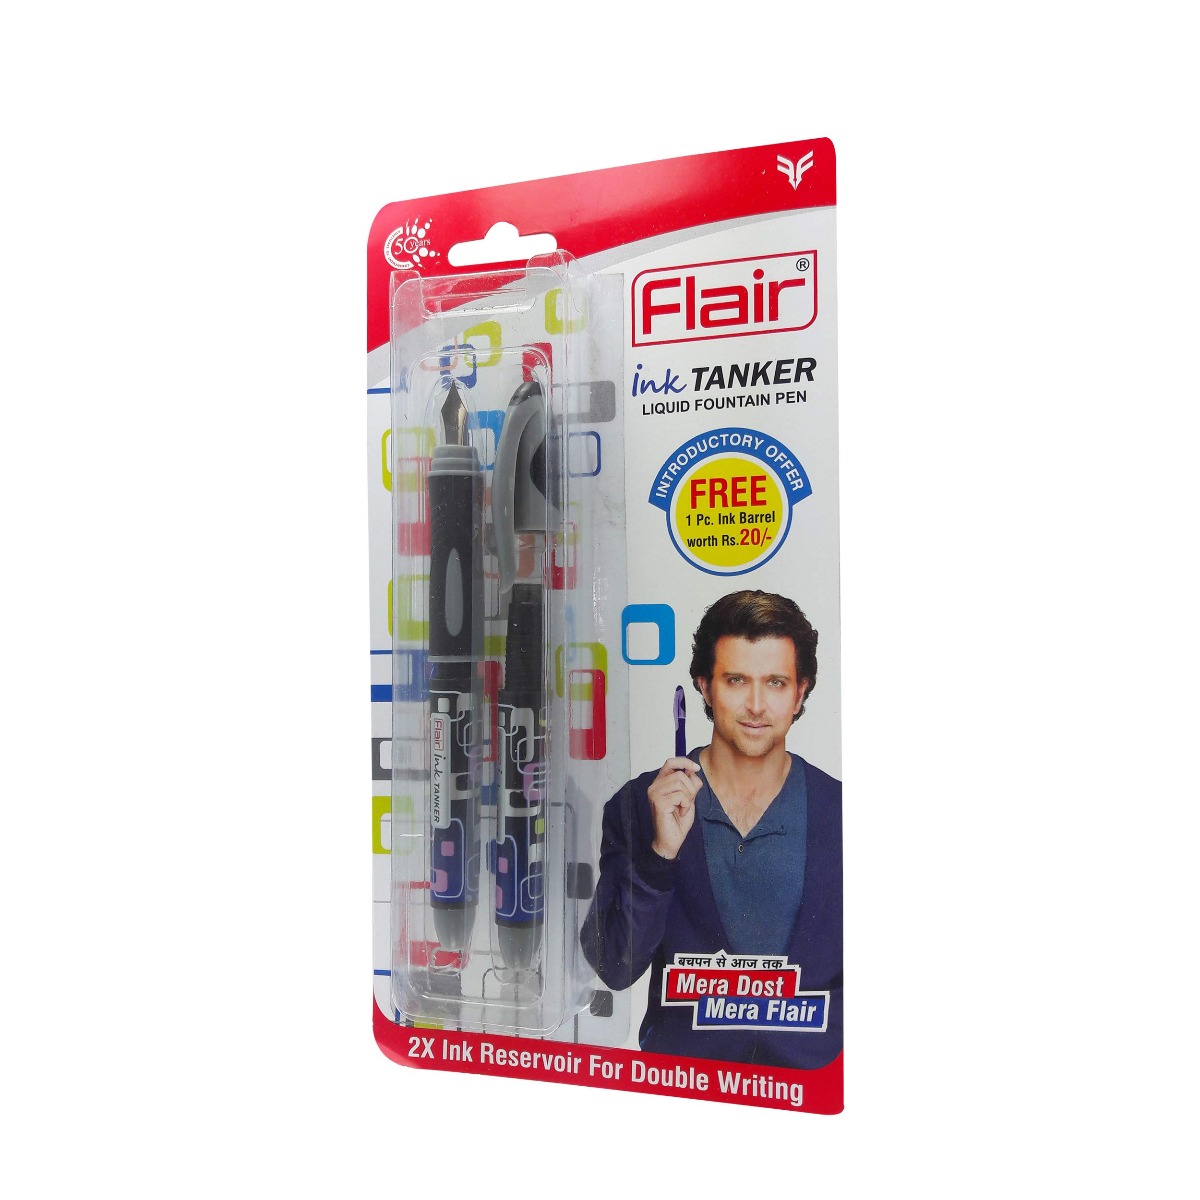 Flair ink Tanker Model: 12832 Black color body with Grey color clip medium tip with free ink Barrel fountain pen